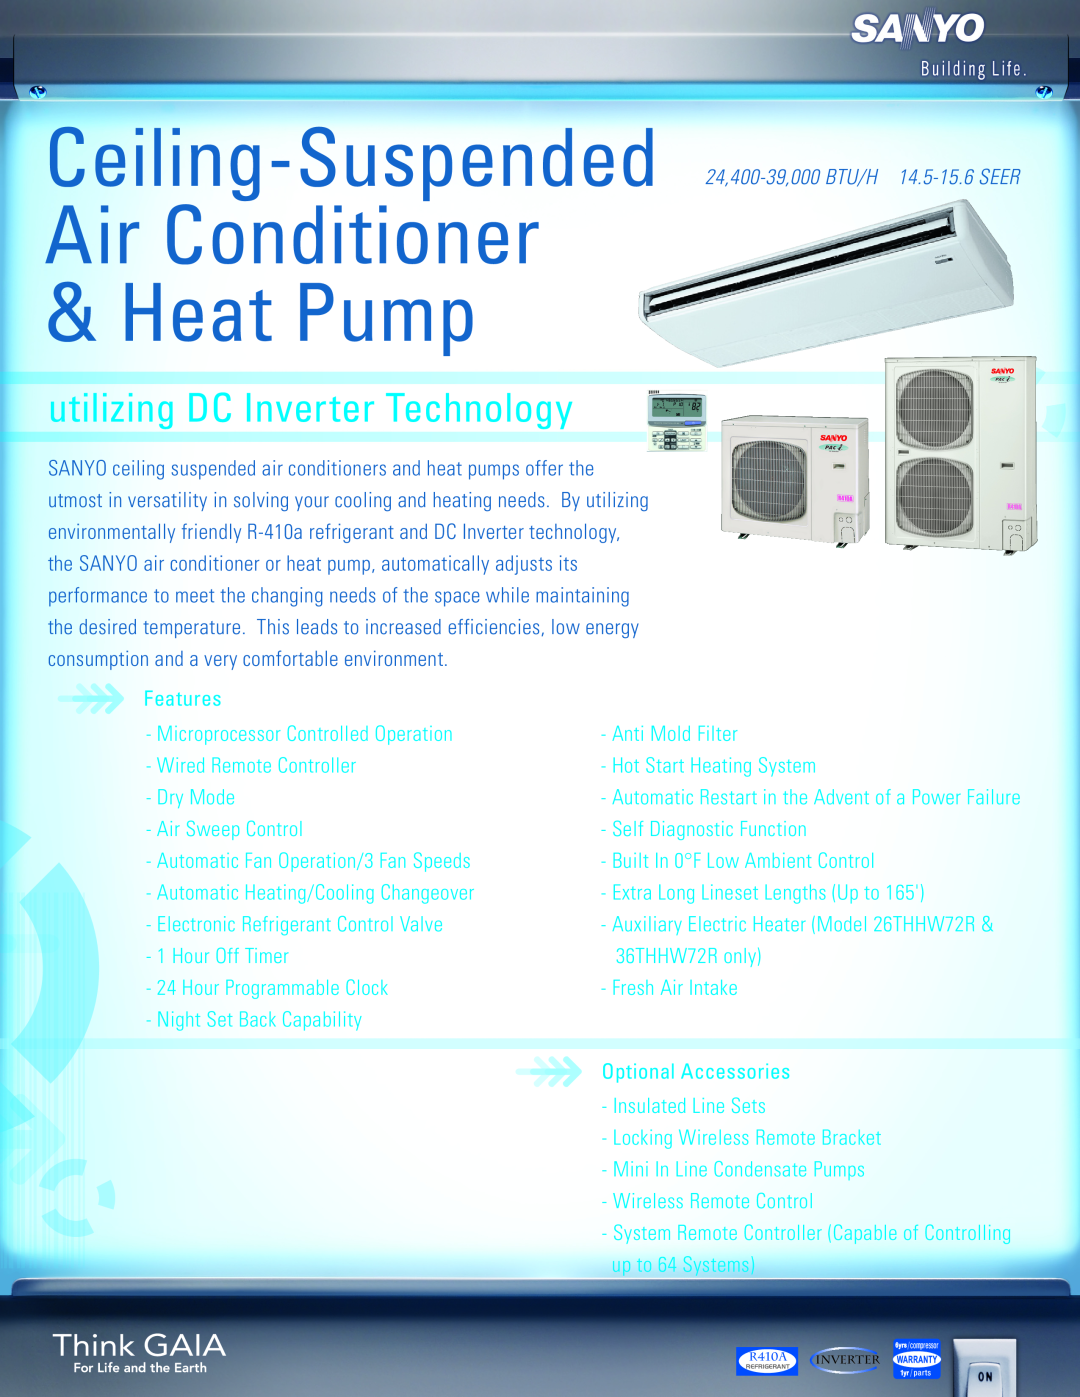 Sanyo E 11583, Q 3135 manual Air Conditioner & Heat Pump, Ceiling-Suspended, utilizing DC Inverter Technology 